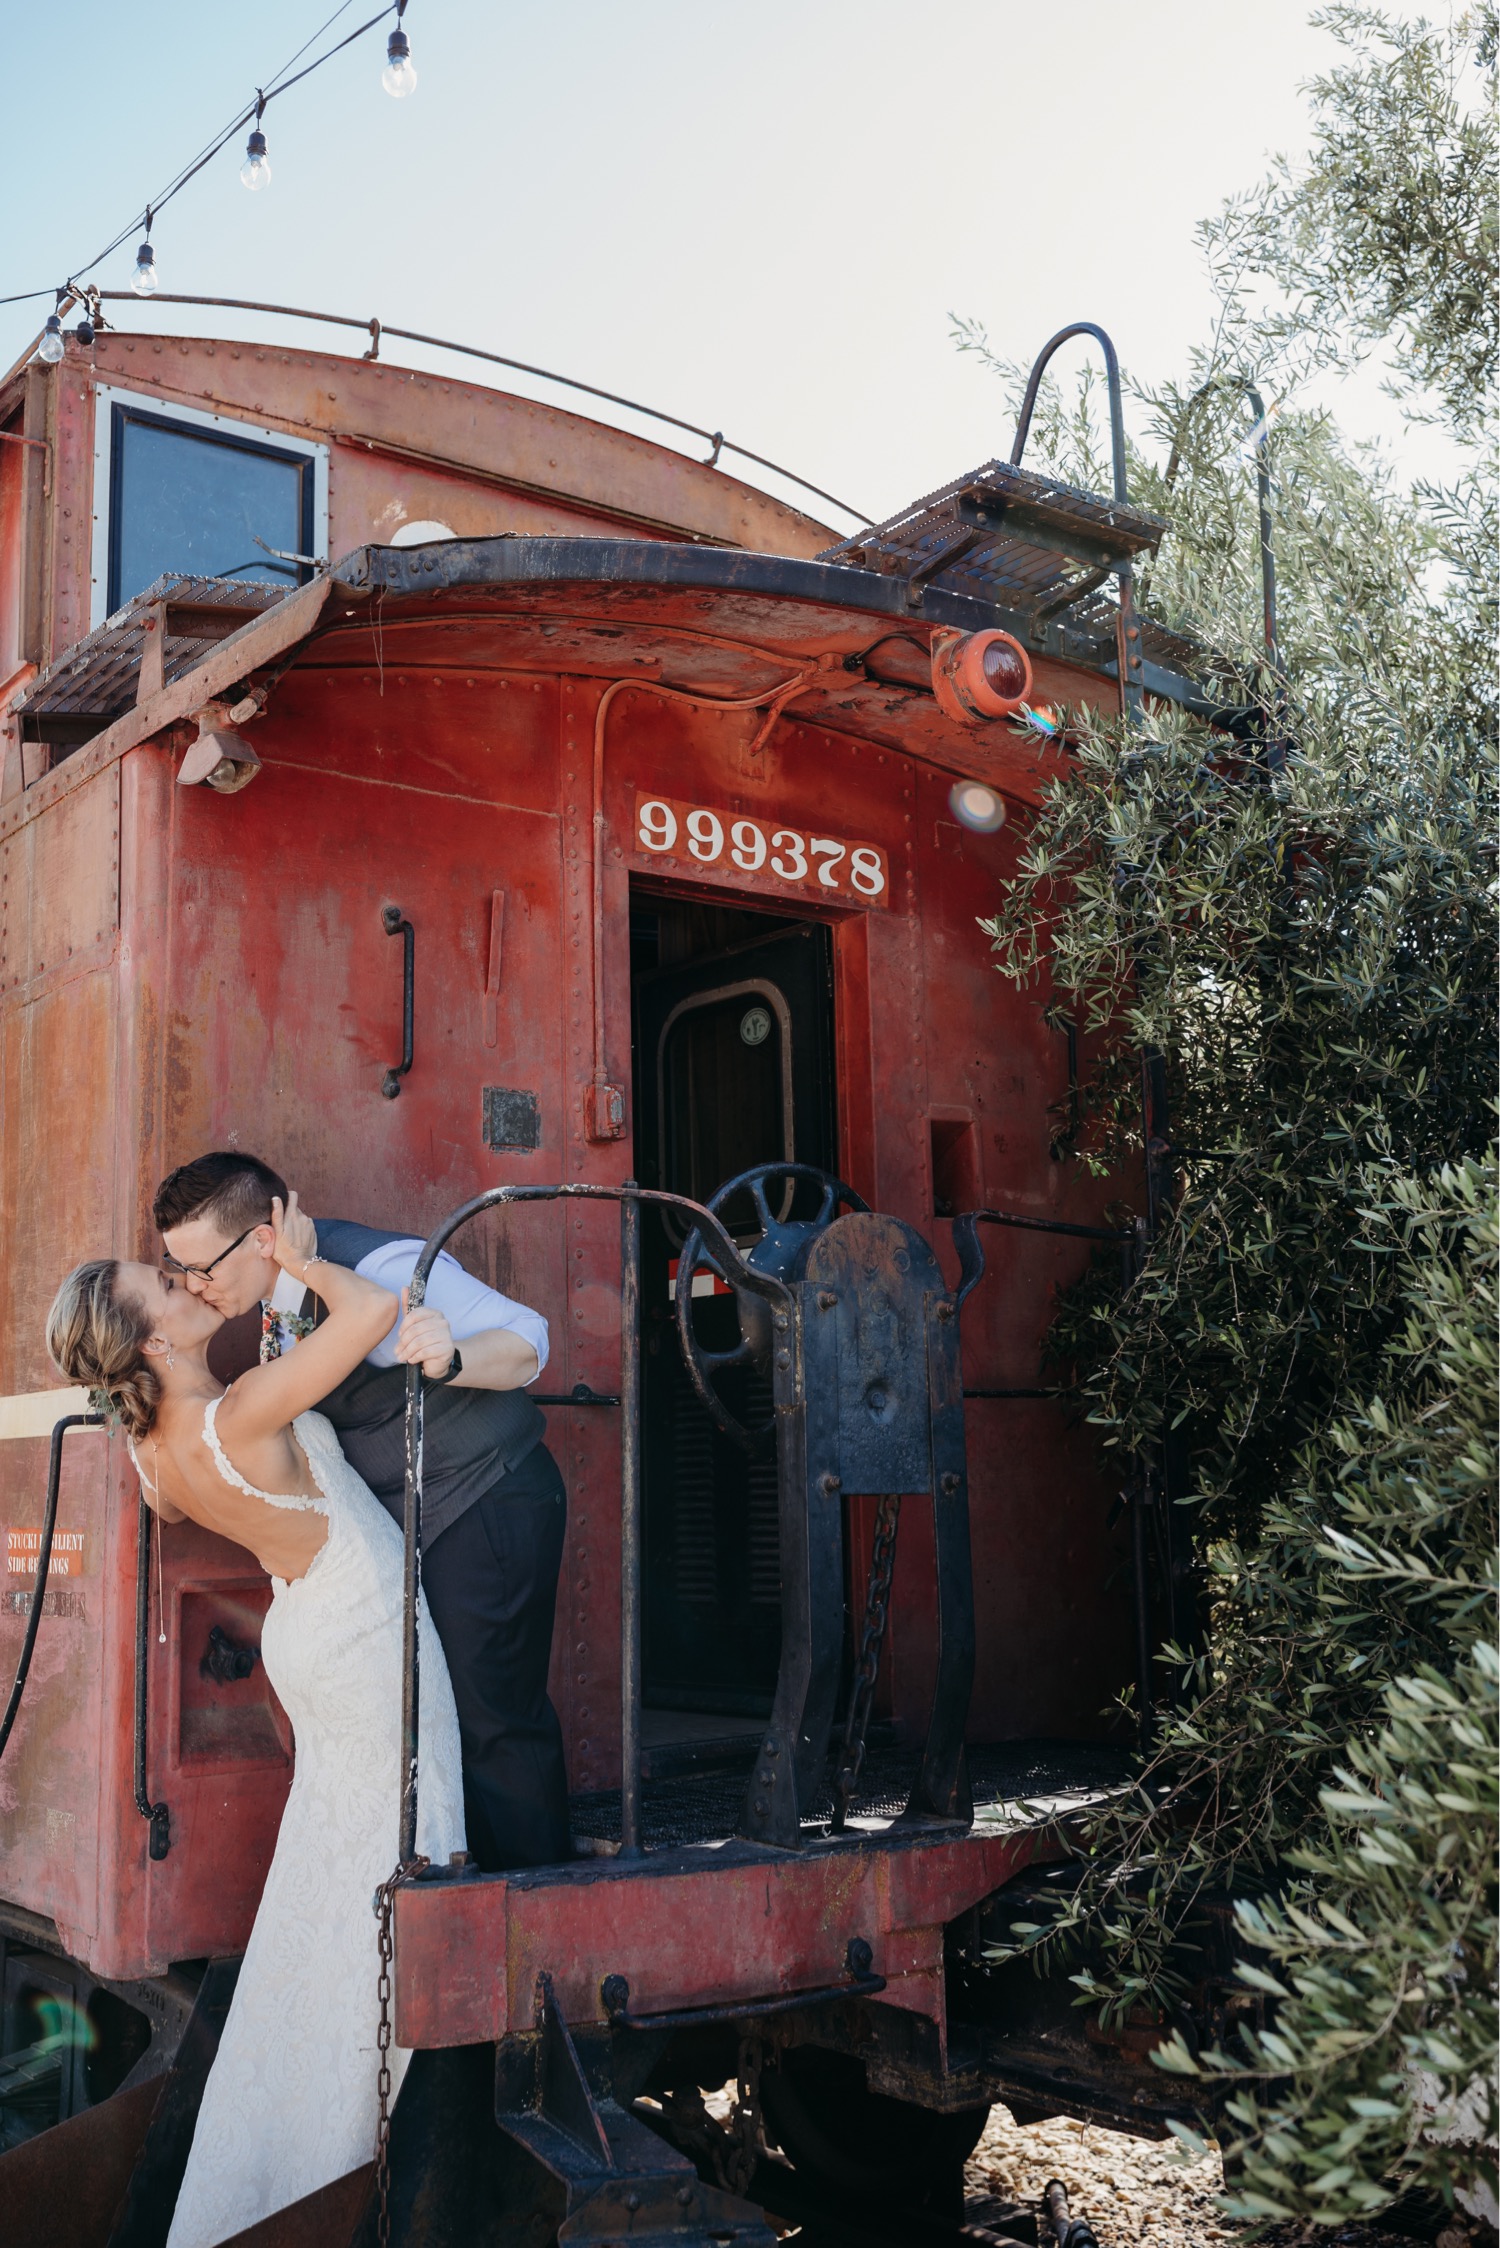 Brides kiss on the end of an old red train car. Liz Koston Photography.